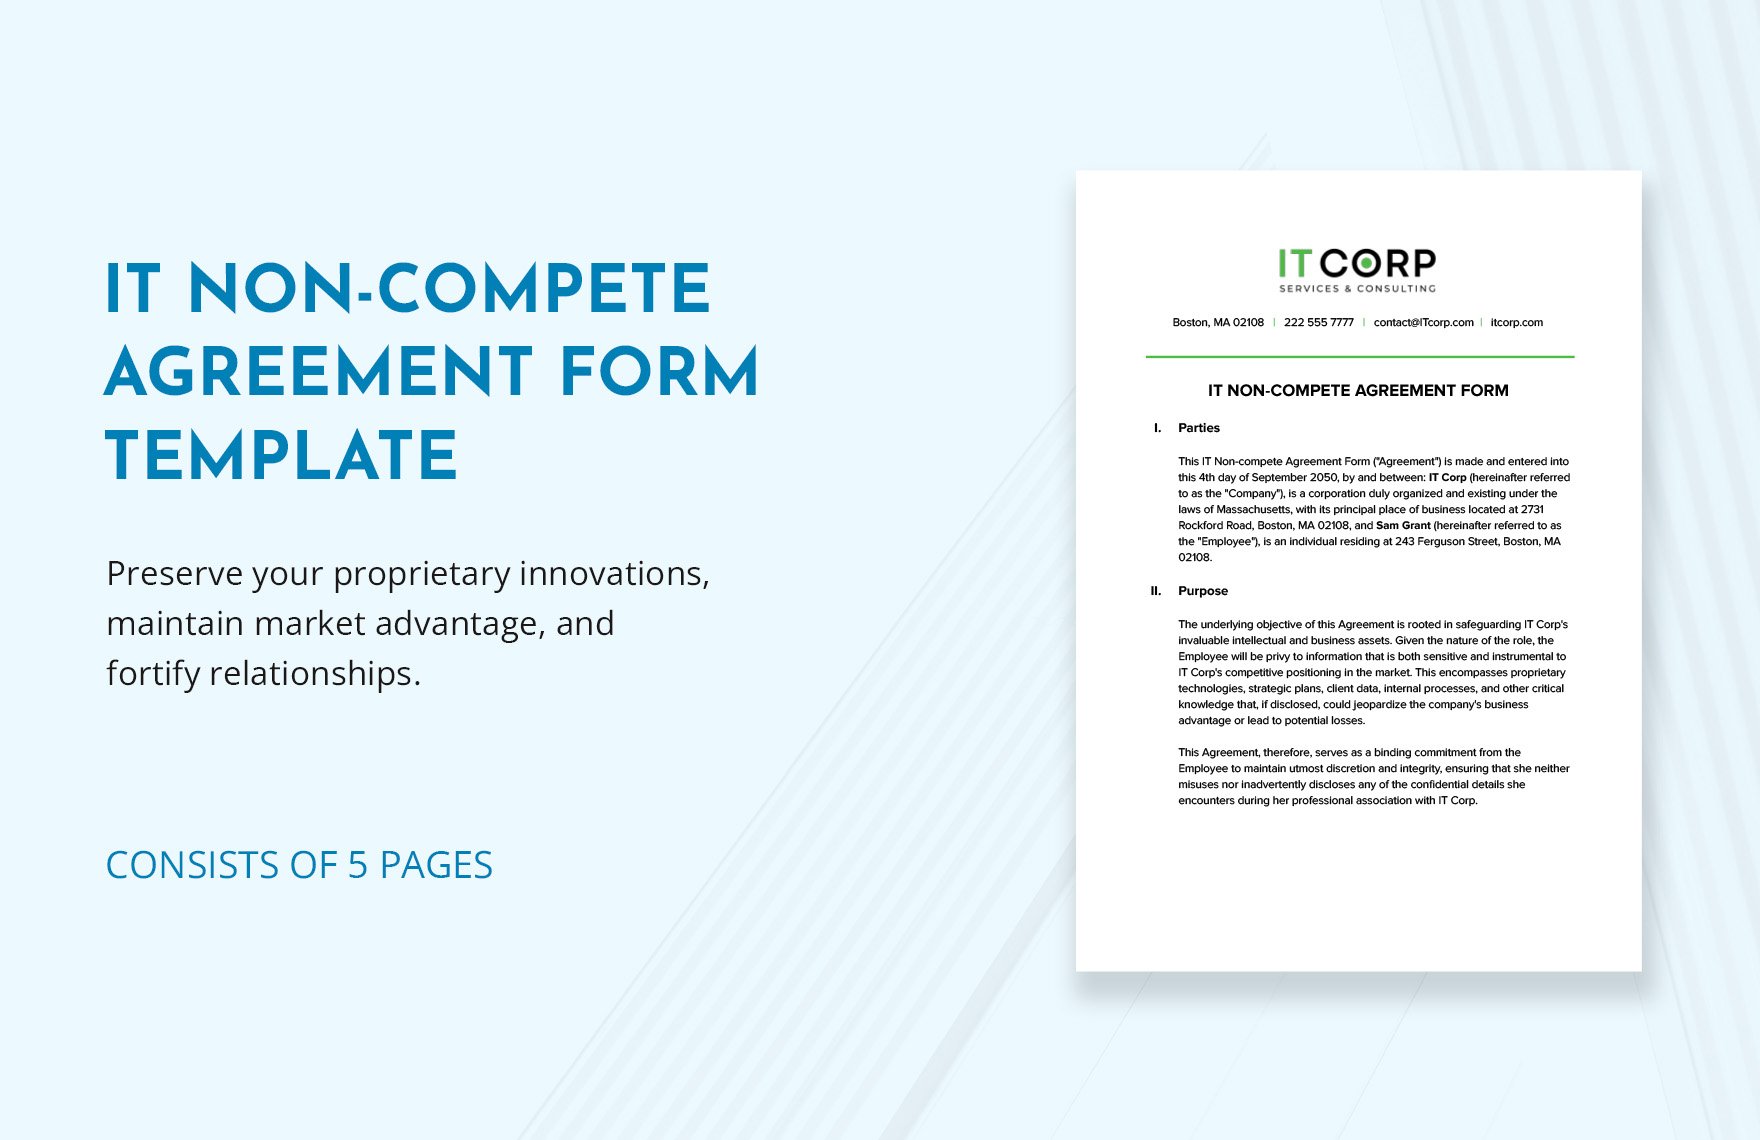 IT Non-compete Agreement Form Template